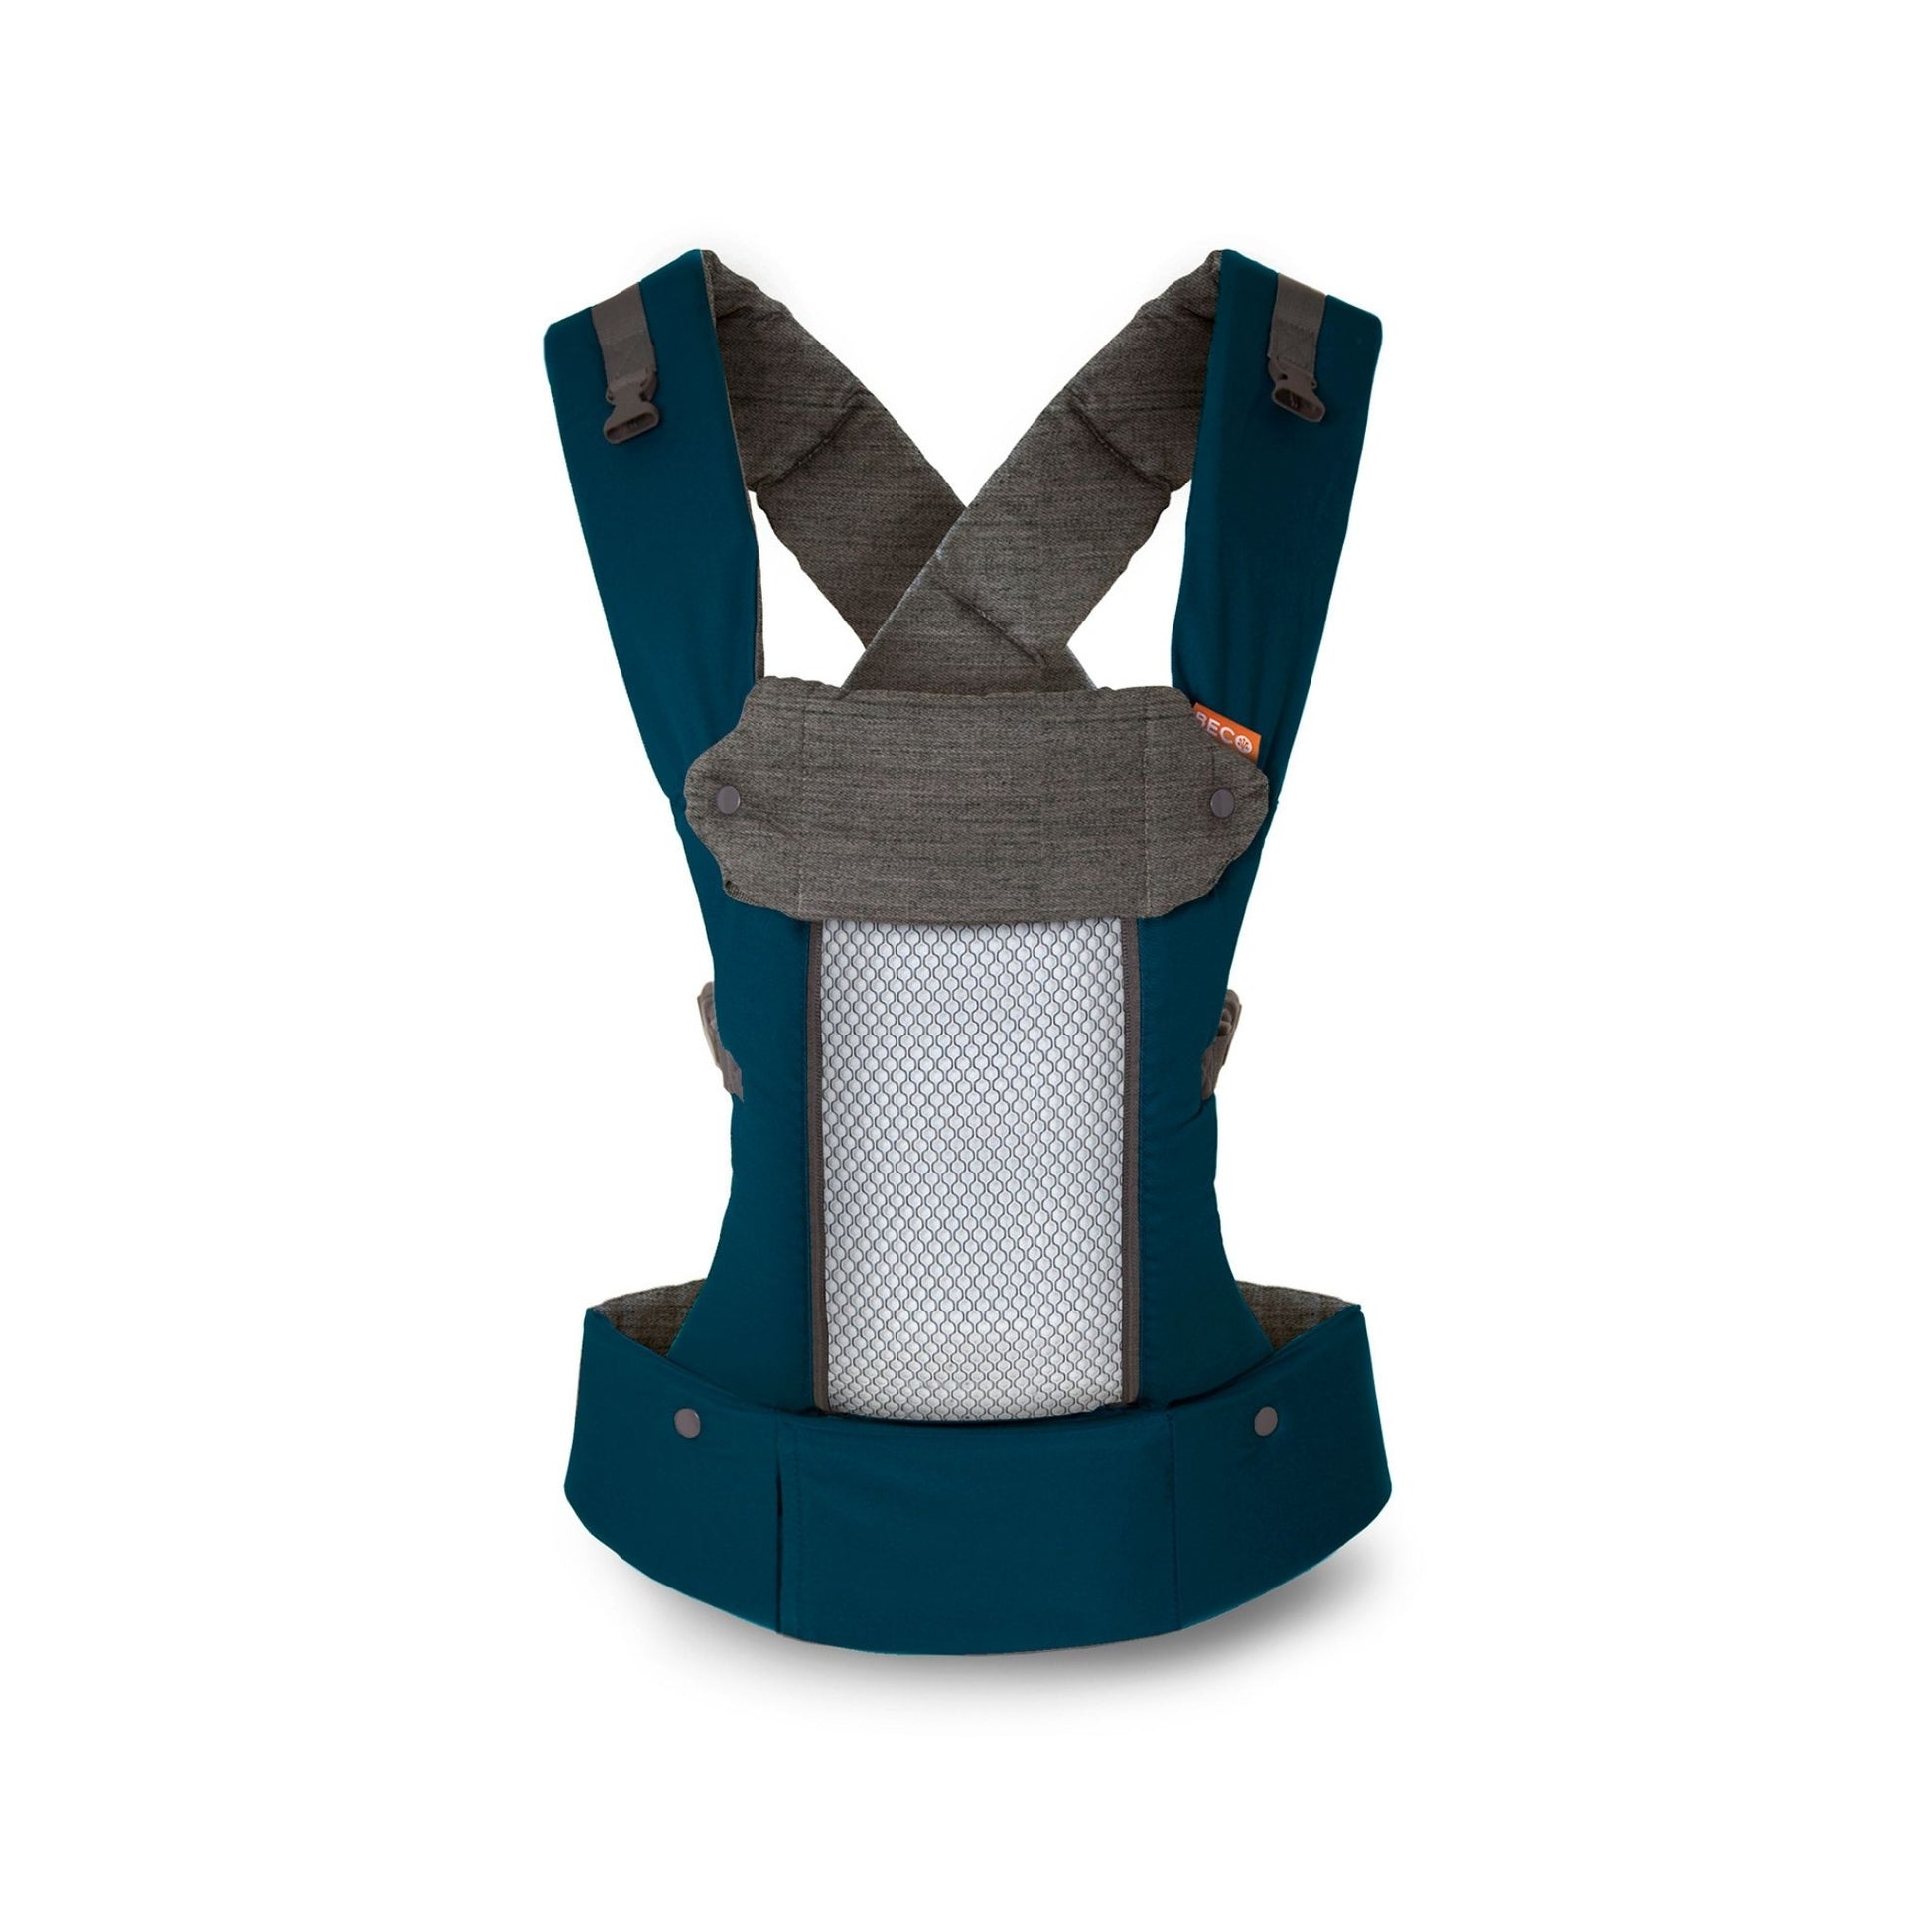 Teal Beco 8 carrier with the mesh panel open